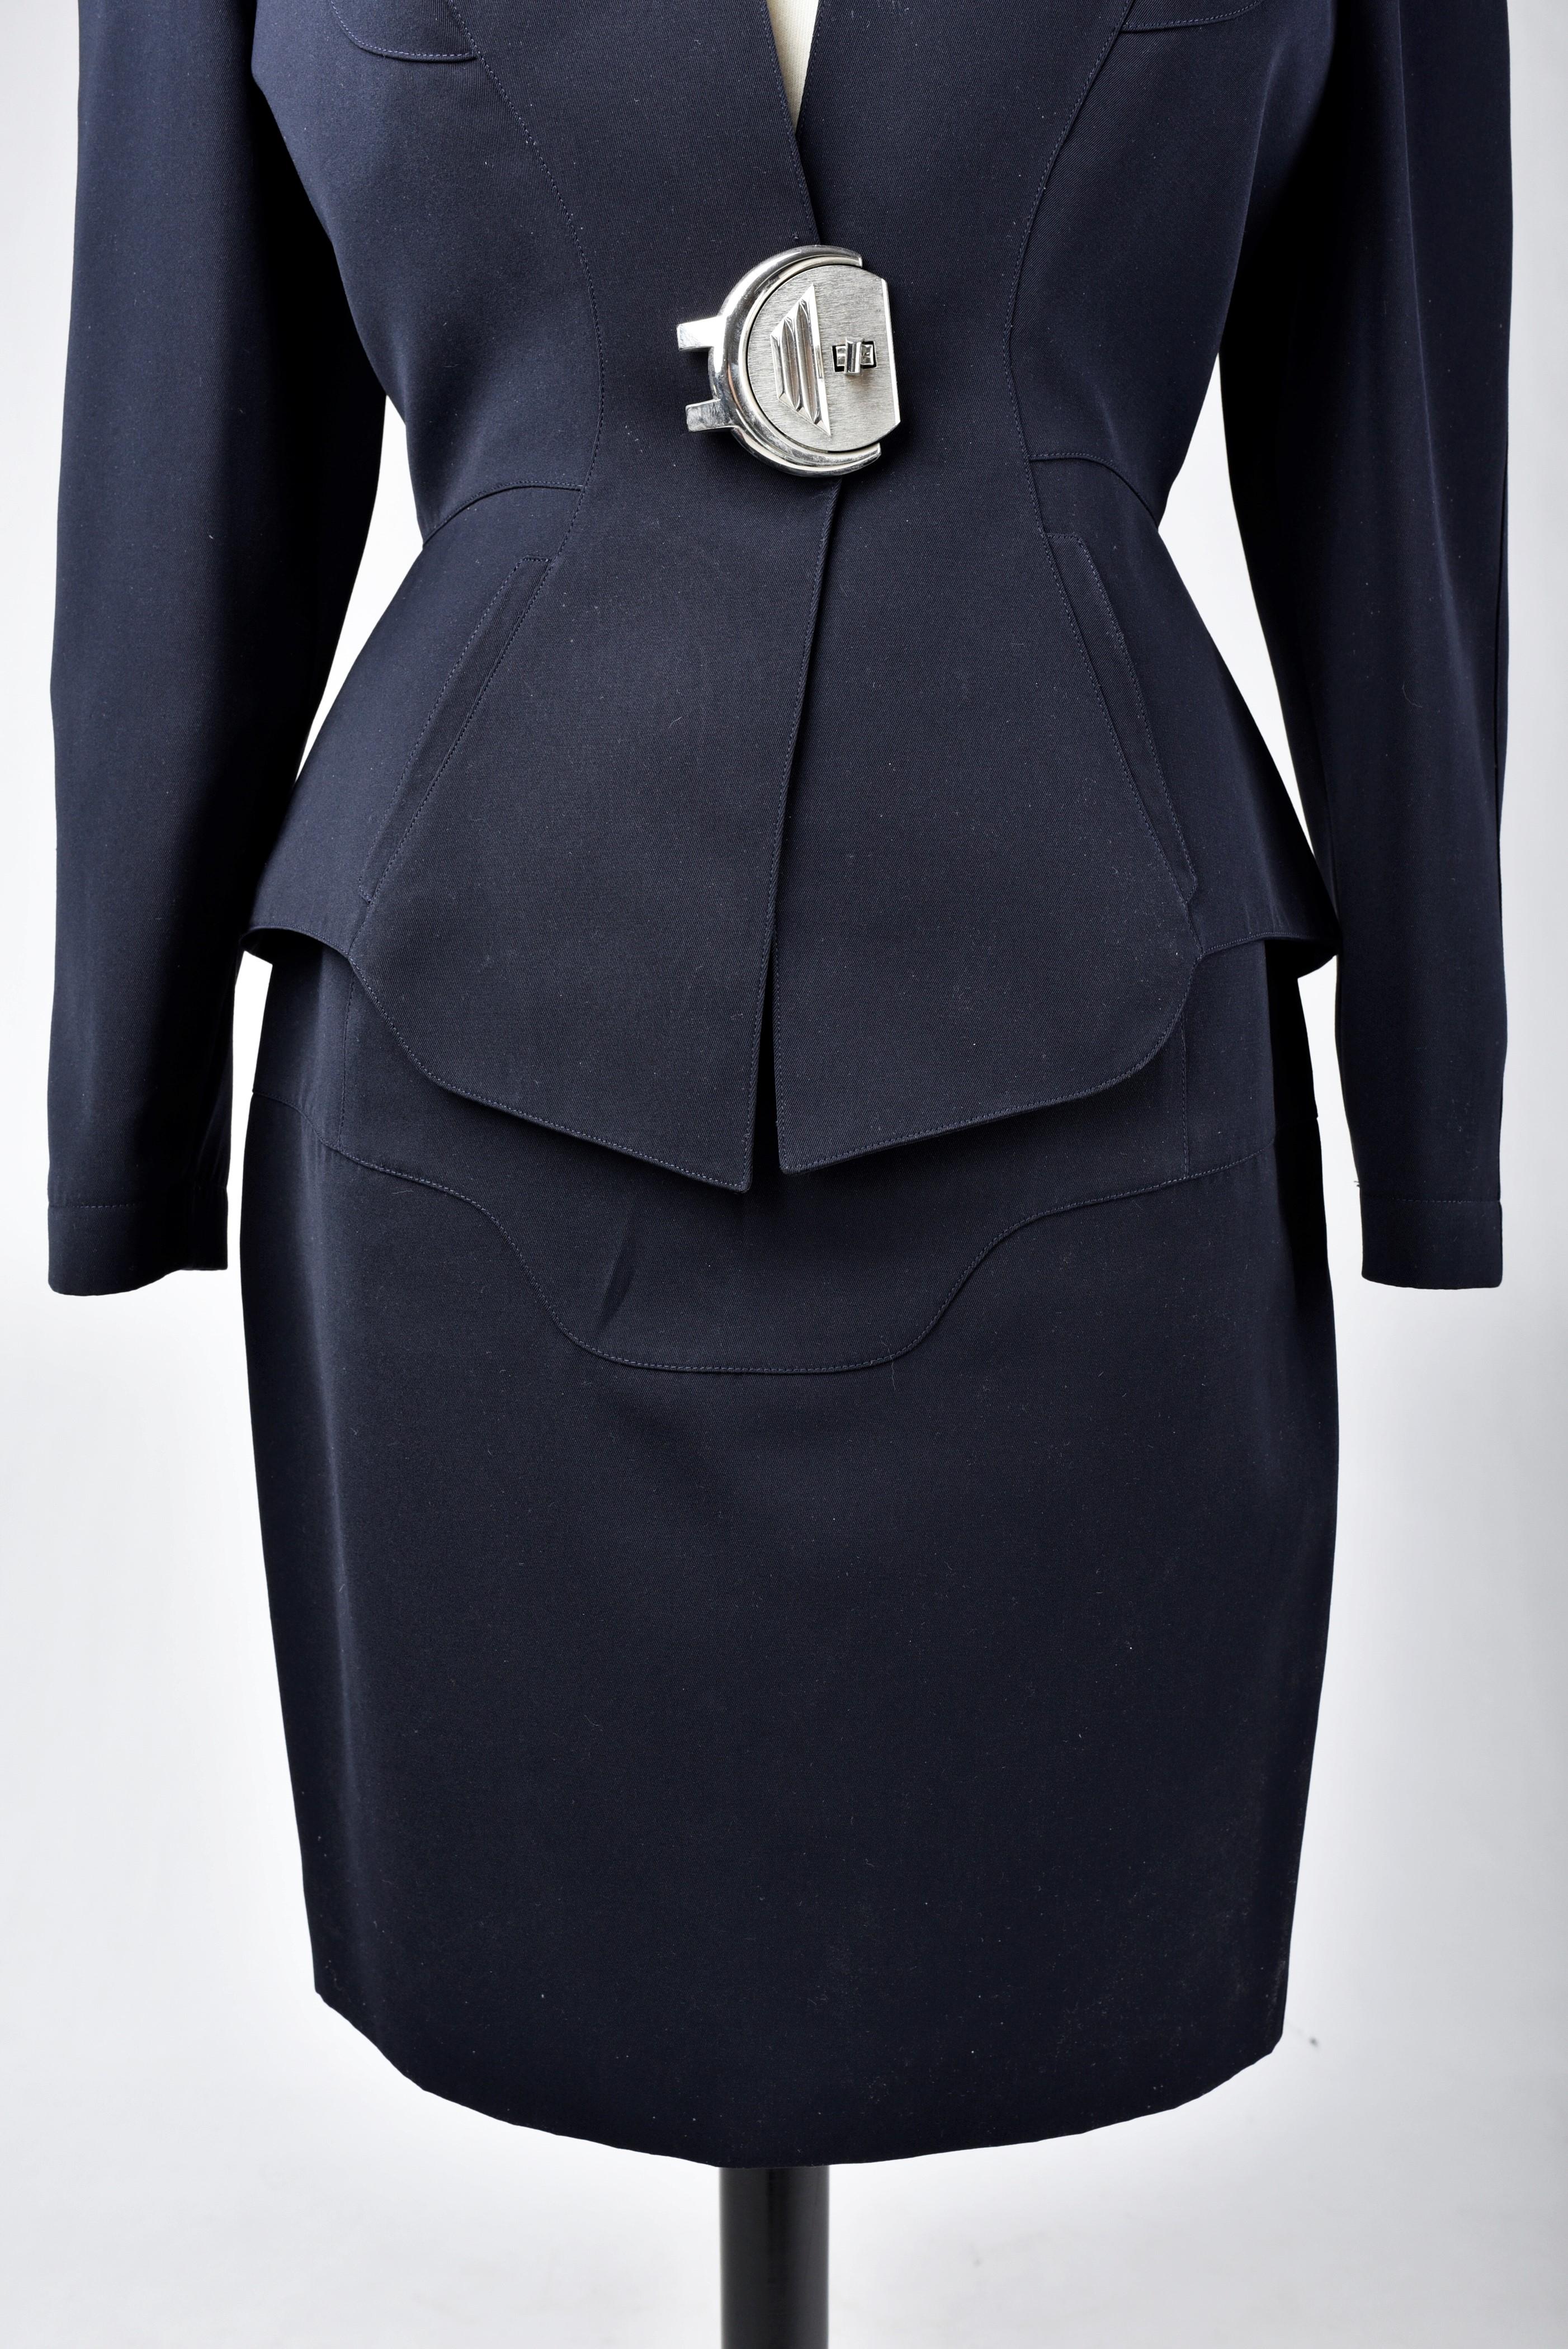 A Thierry Mugler Couture Black Tuxedo Skirt Suit - France Circa 1990/2000 For Sale 3